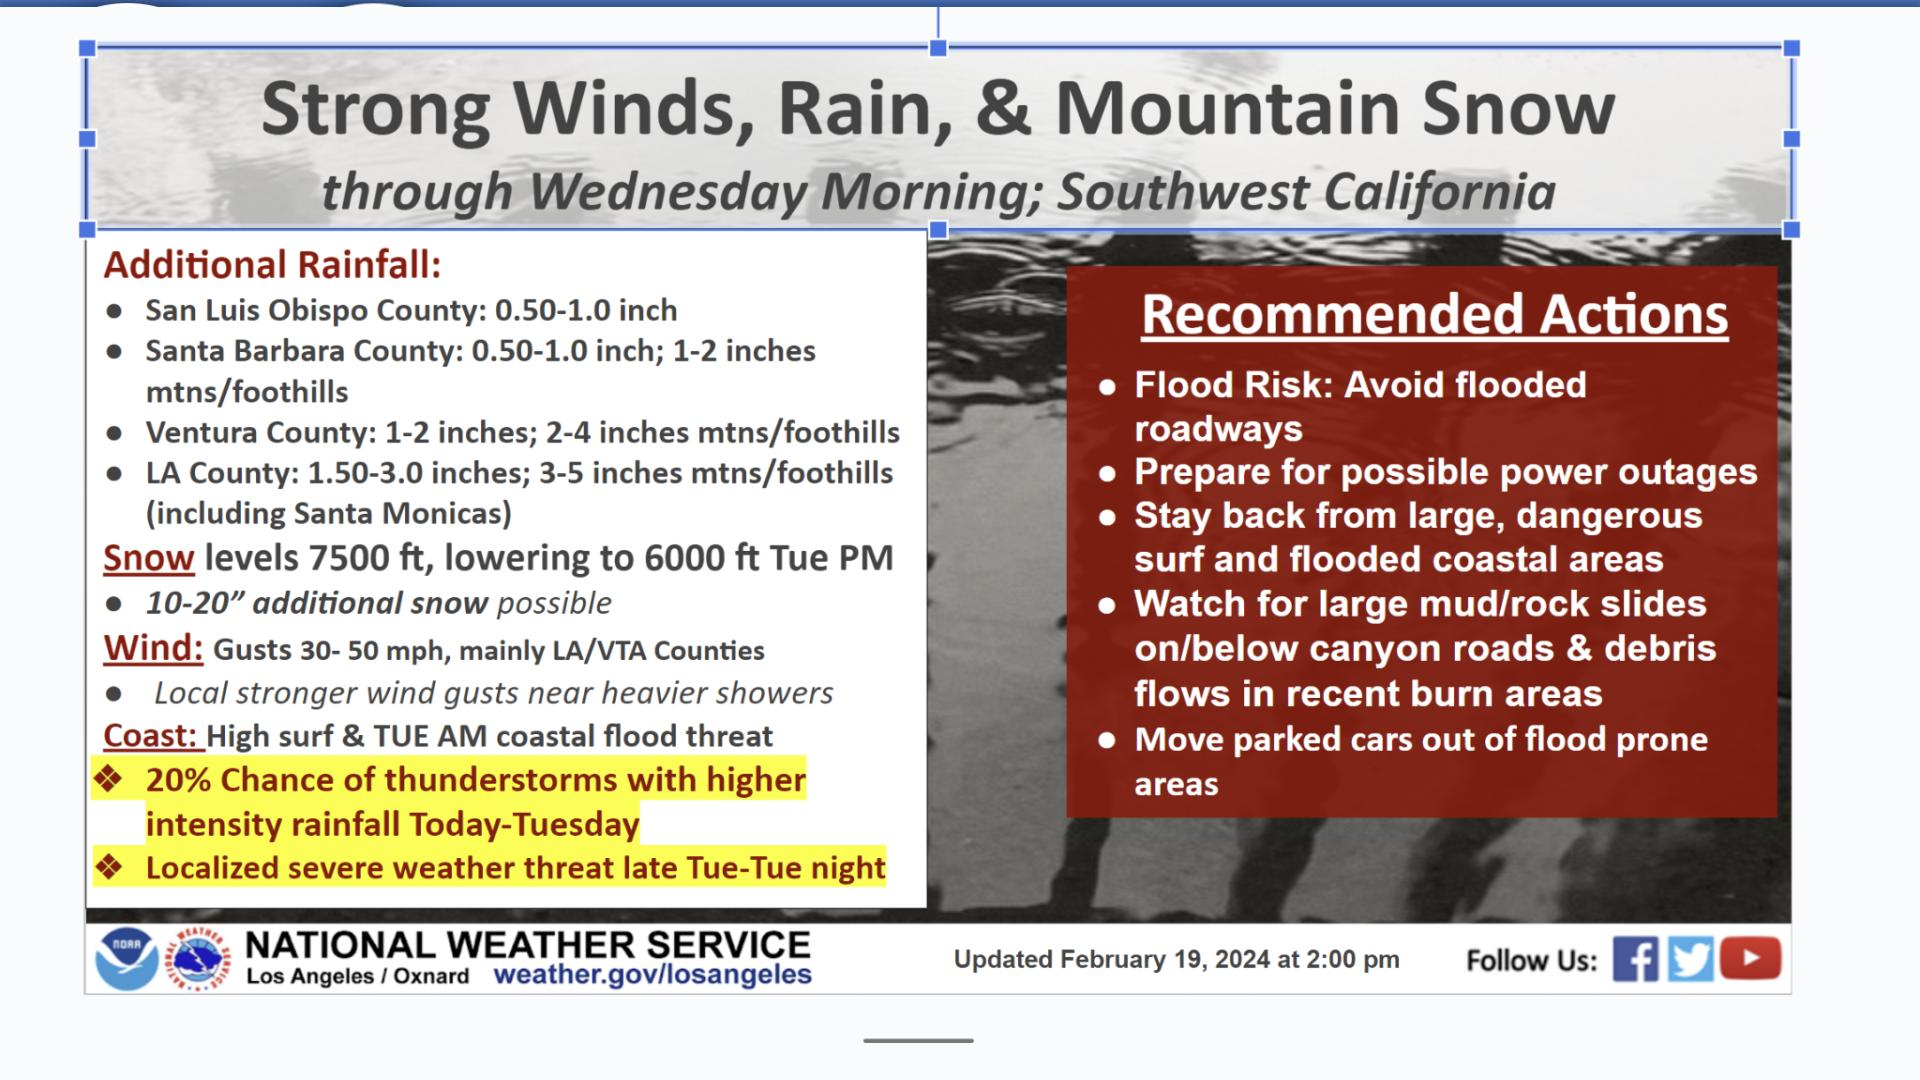 The severe weather impacting California will begin to subside on Wednesday